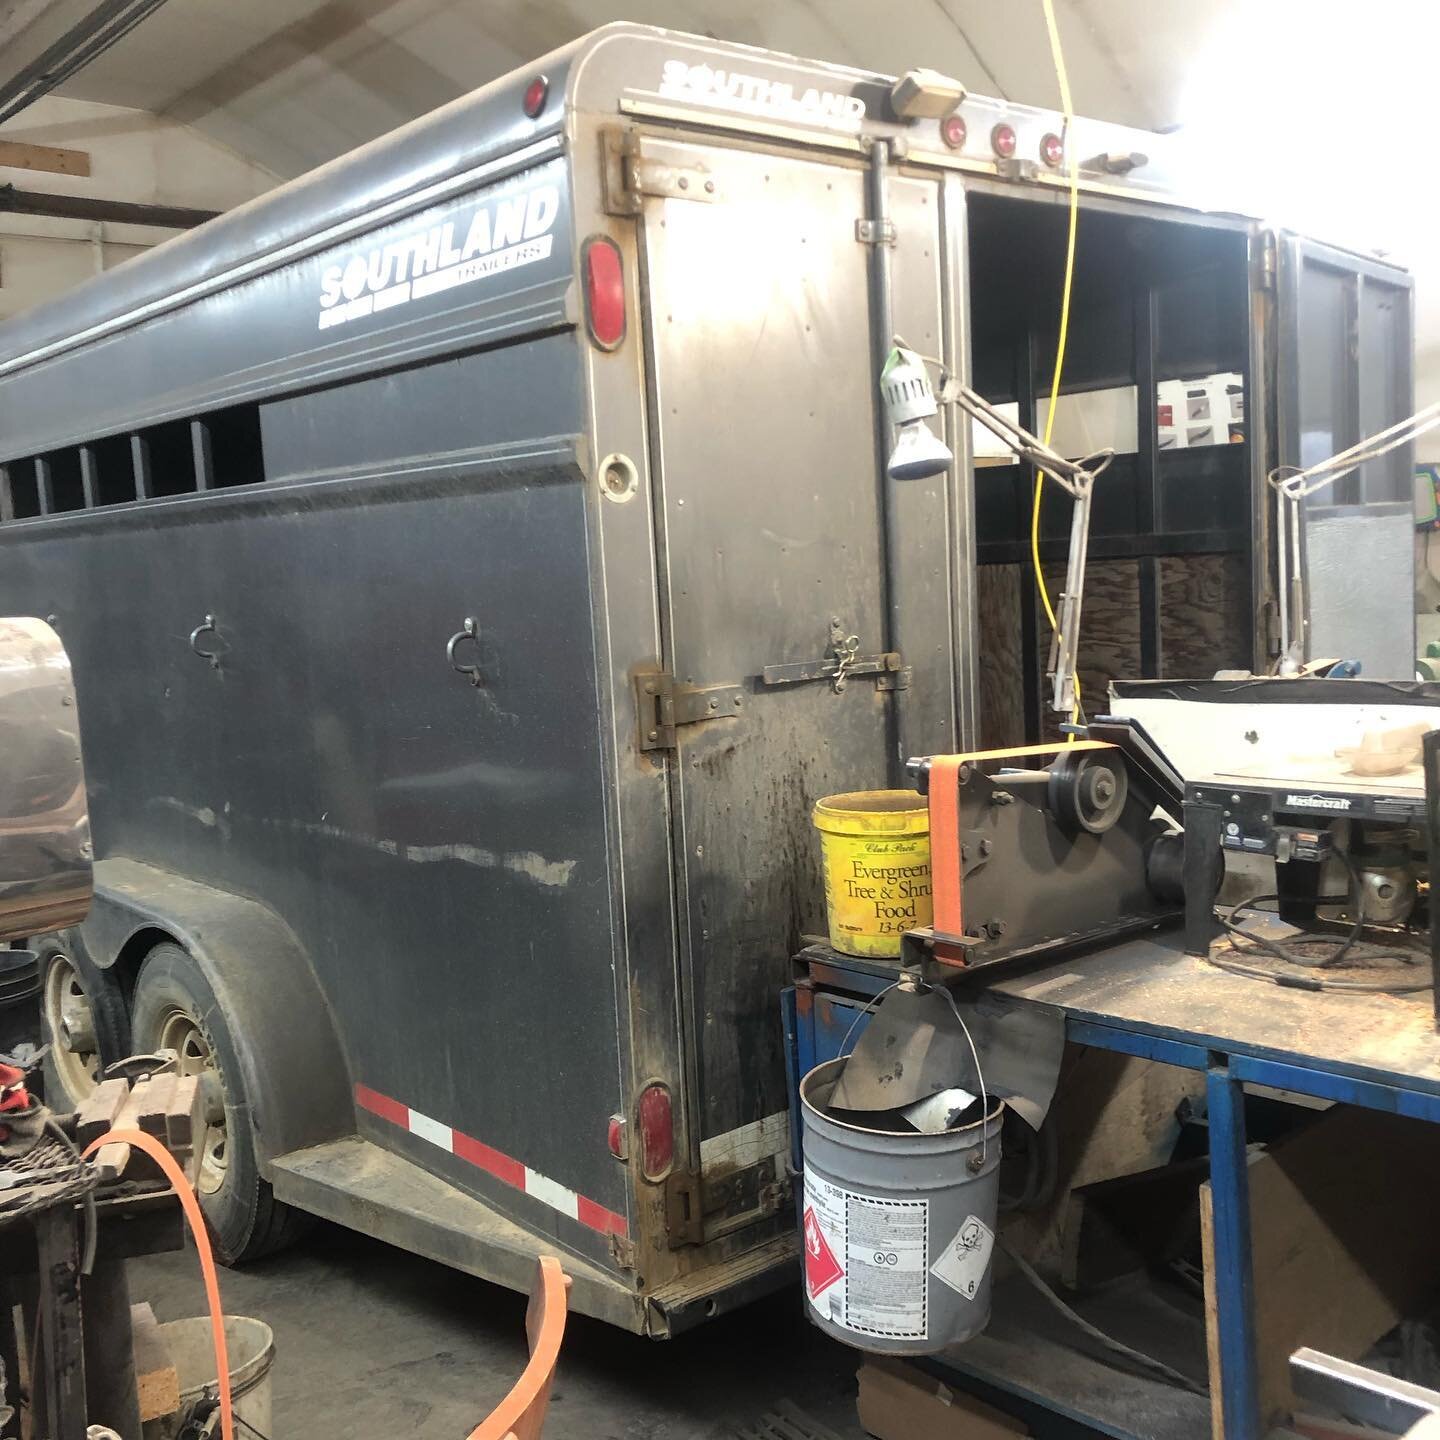 Not much excess room. Rusty parts cut out and new steel welded in. Painted. New rubber on floor. Wondering how much cold the furnace can handle ? #horses #trailer